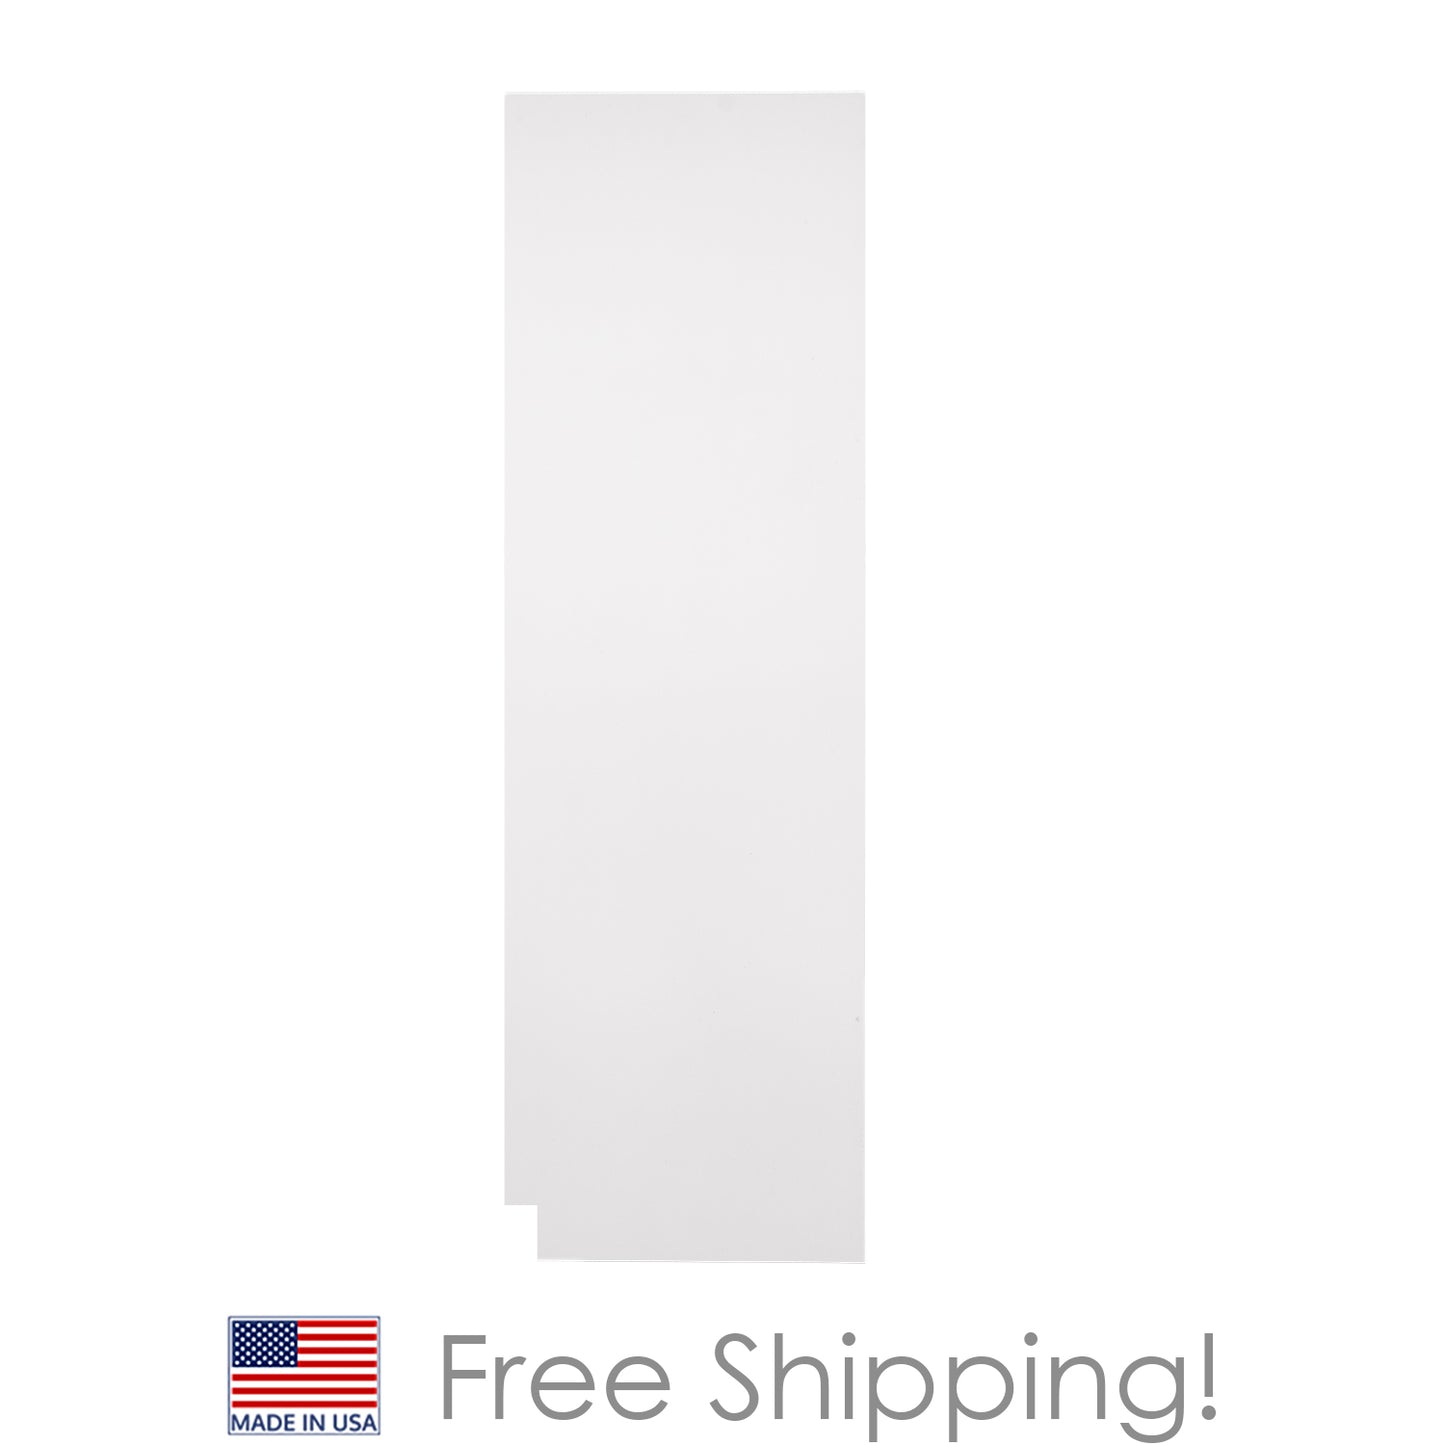 Quicklock RTA (Ready-to-Assemble) Pure White .25"X23.25"X84" Pantry End Panel - Right Side